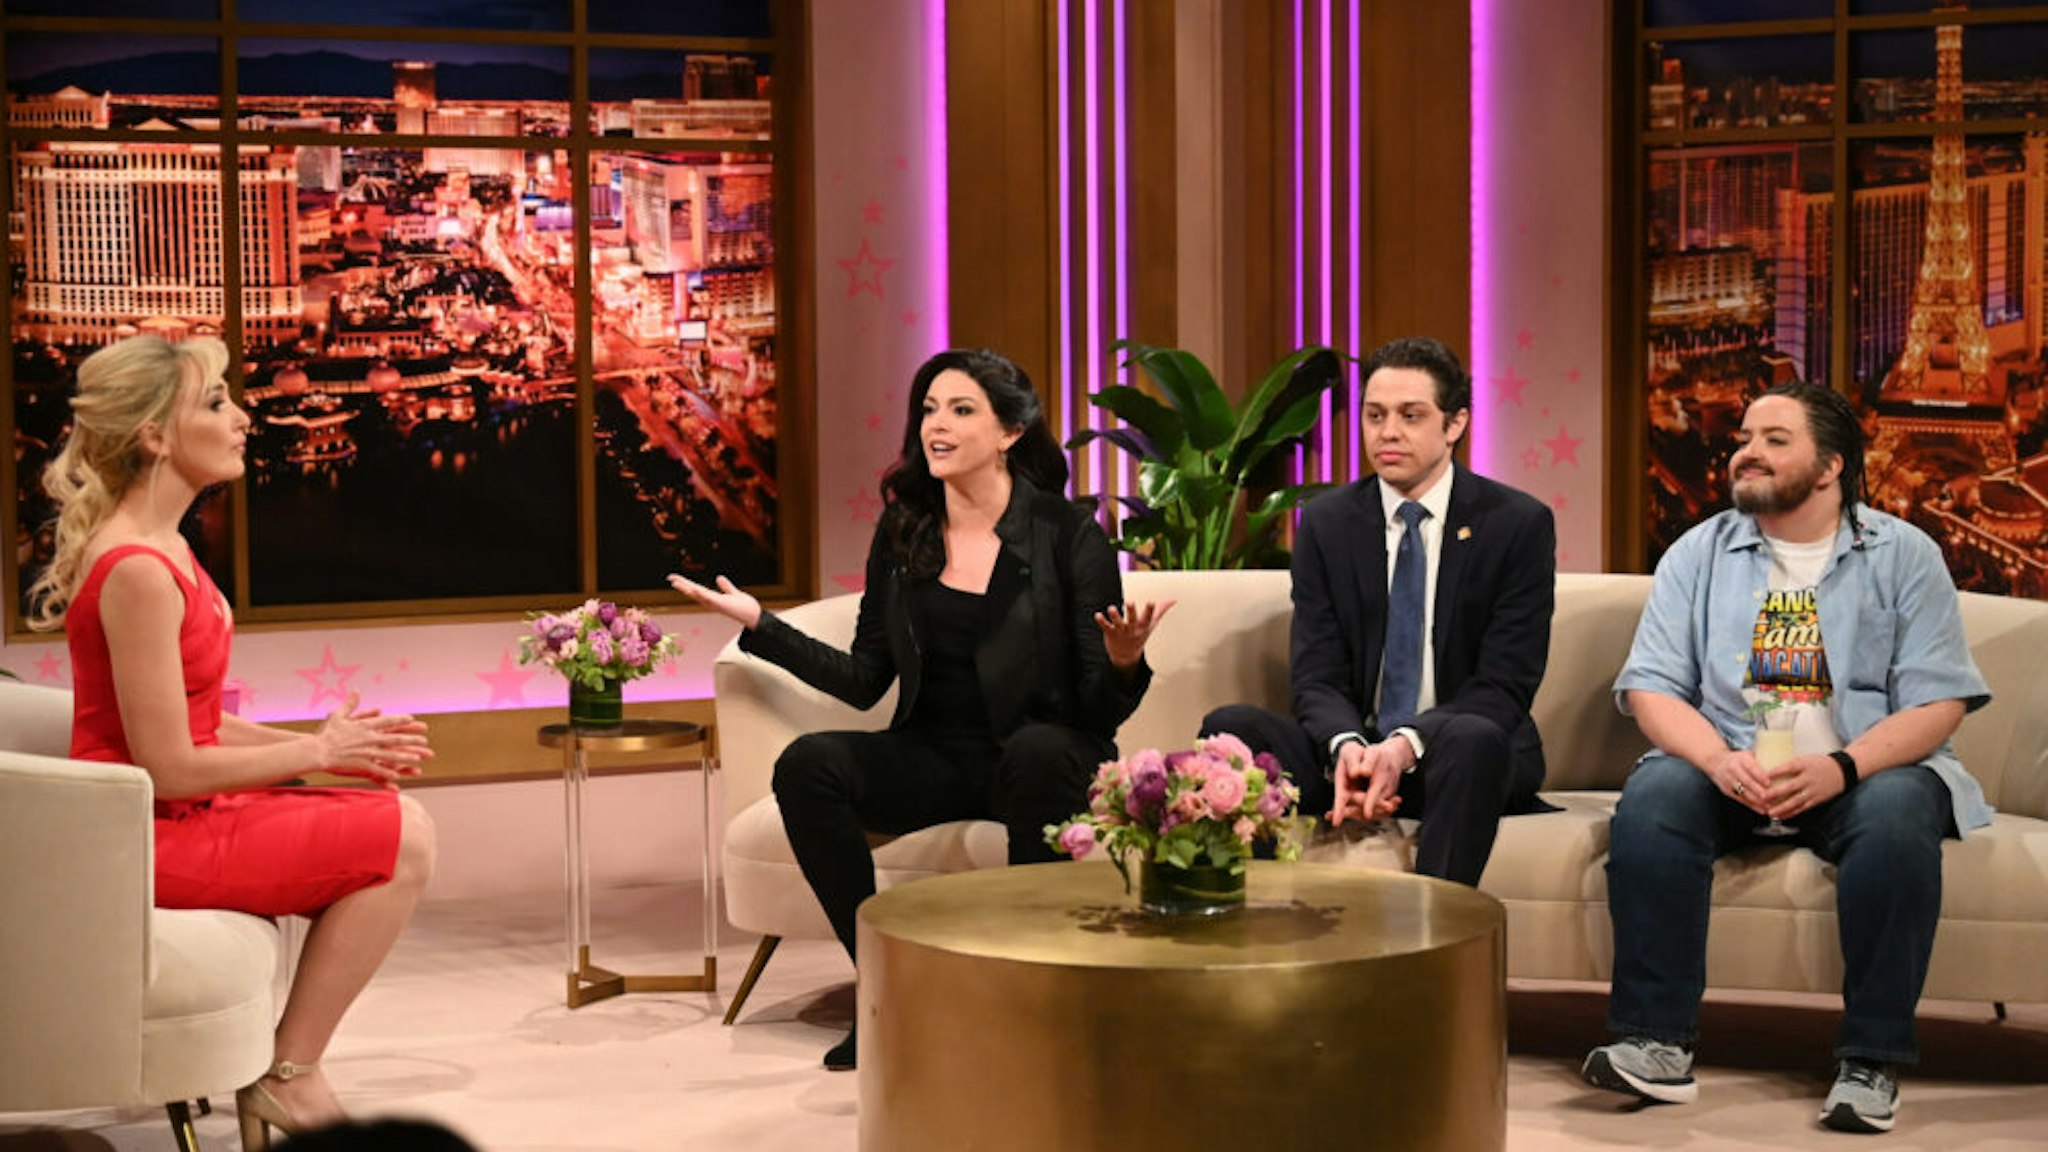 SATURDAY NIGHT LIVE -- "Regé-Jean Page" Episode 1798 -- Pictured: (l-r) Chloe Fineman as Britney Spears, Cecily Strong as Gina Carano, Pete Davidson as Andrew Cuomo, and Aidy Bryant as Ted Cruz during the "Britney Spears" Cold Open on Saturday, February 20, 2021